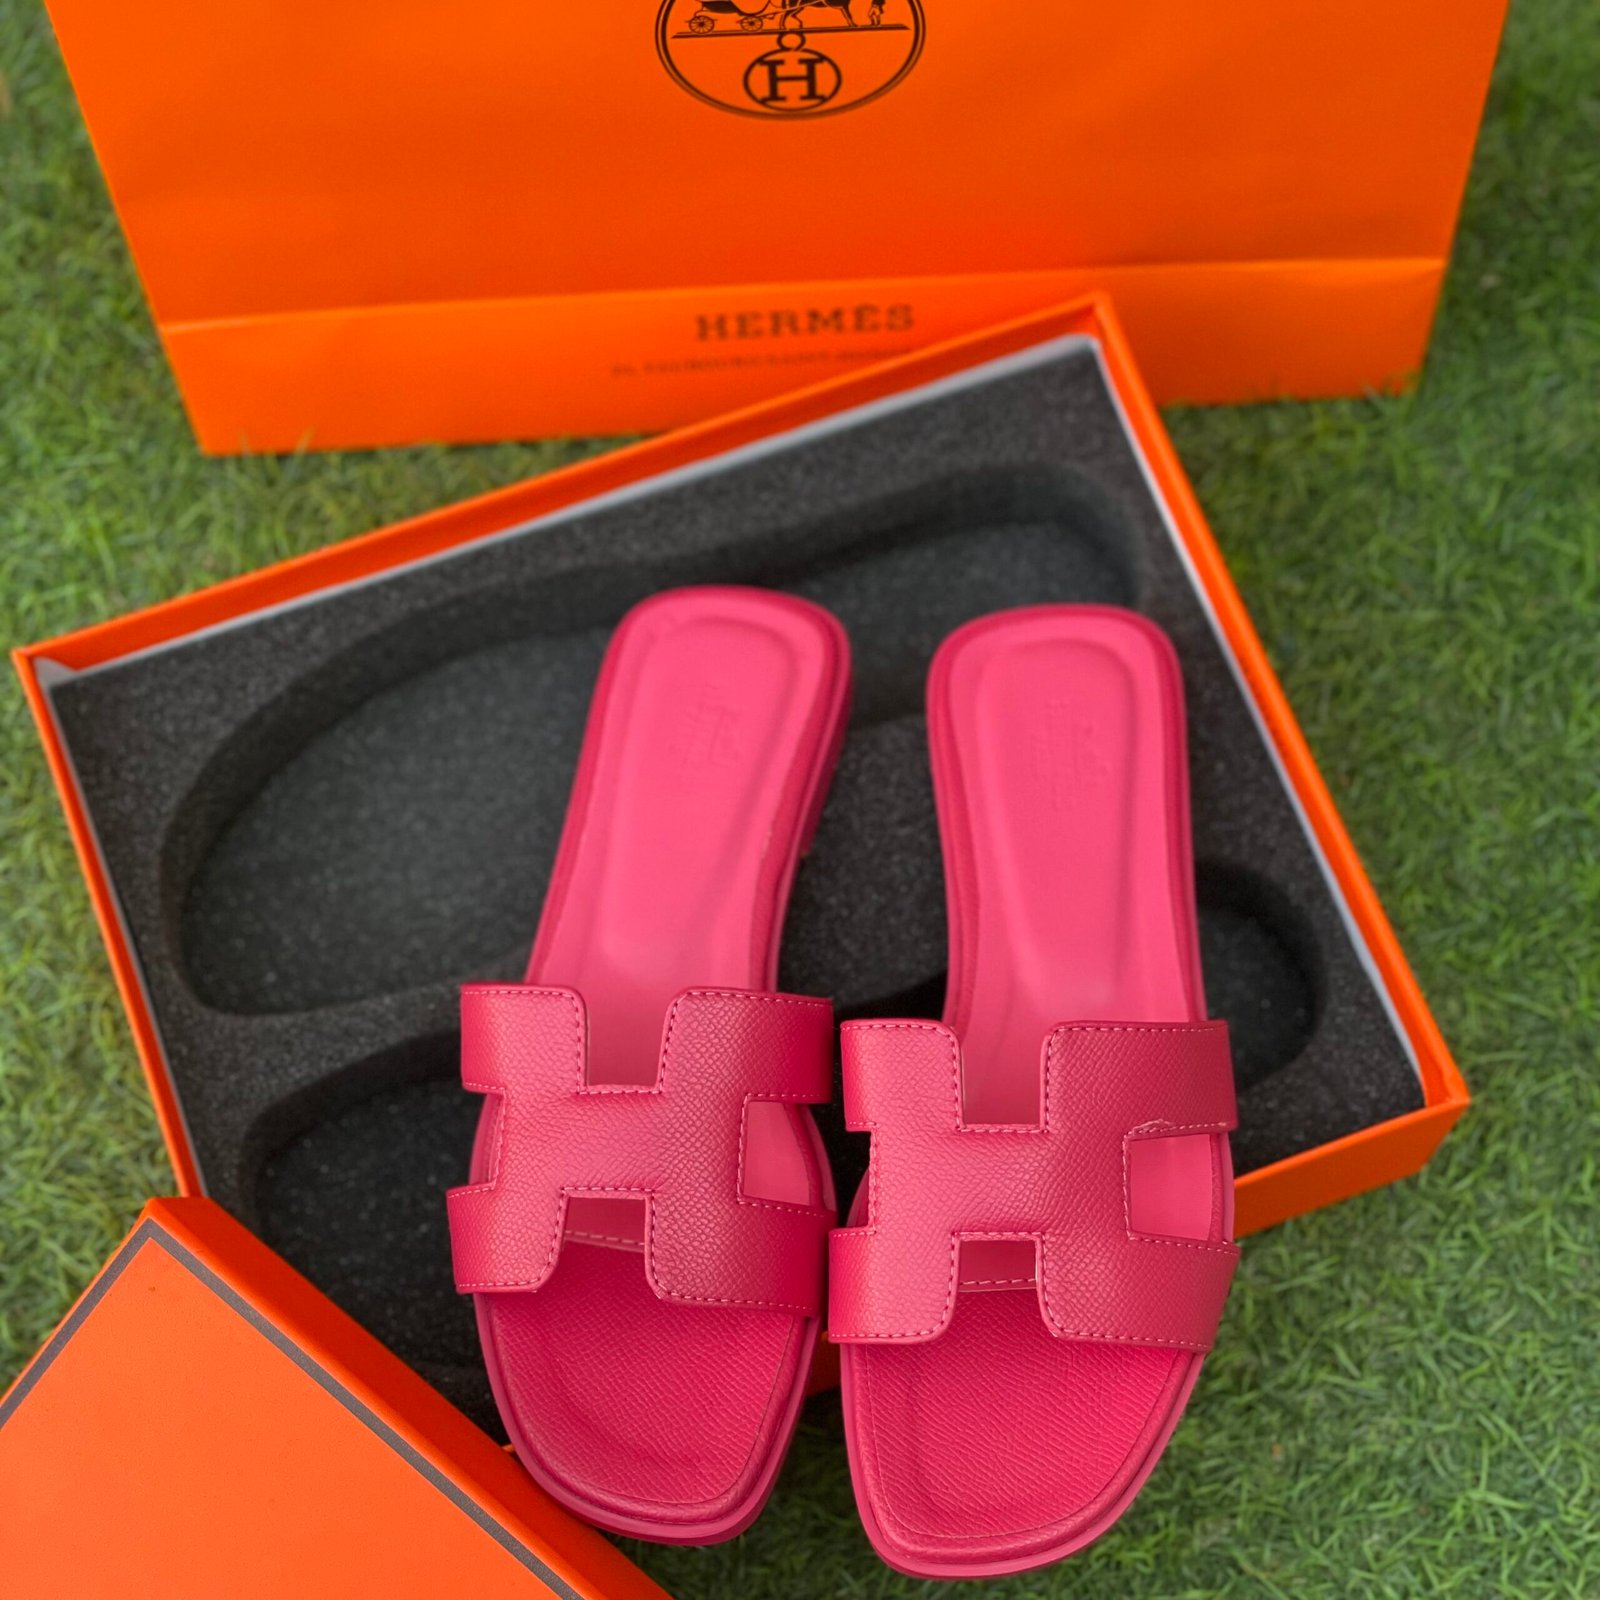 Hermes flat( pink) – my shoes